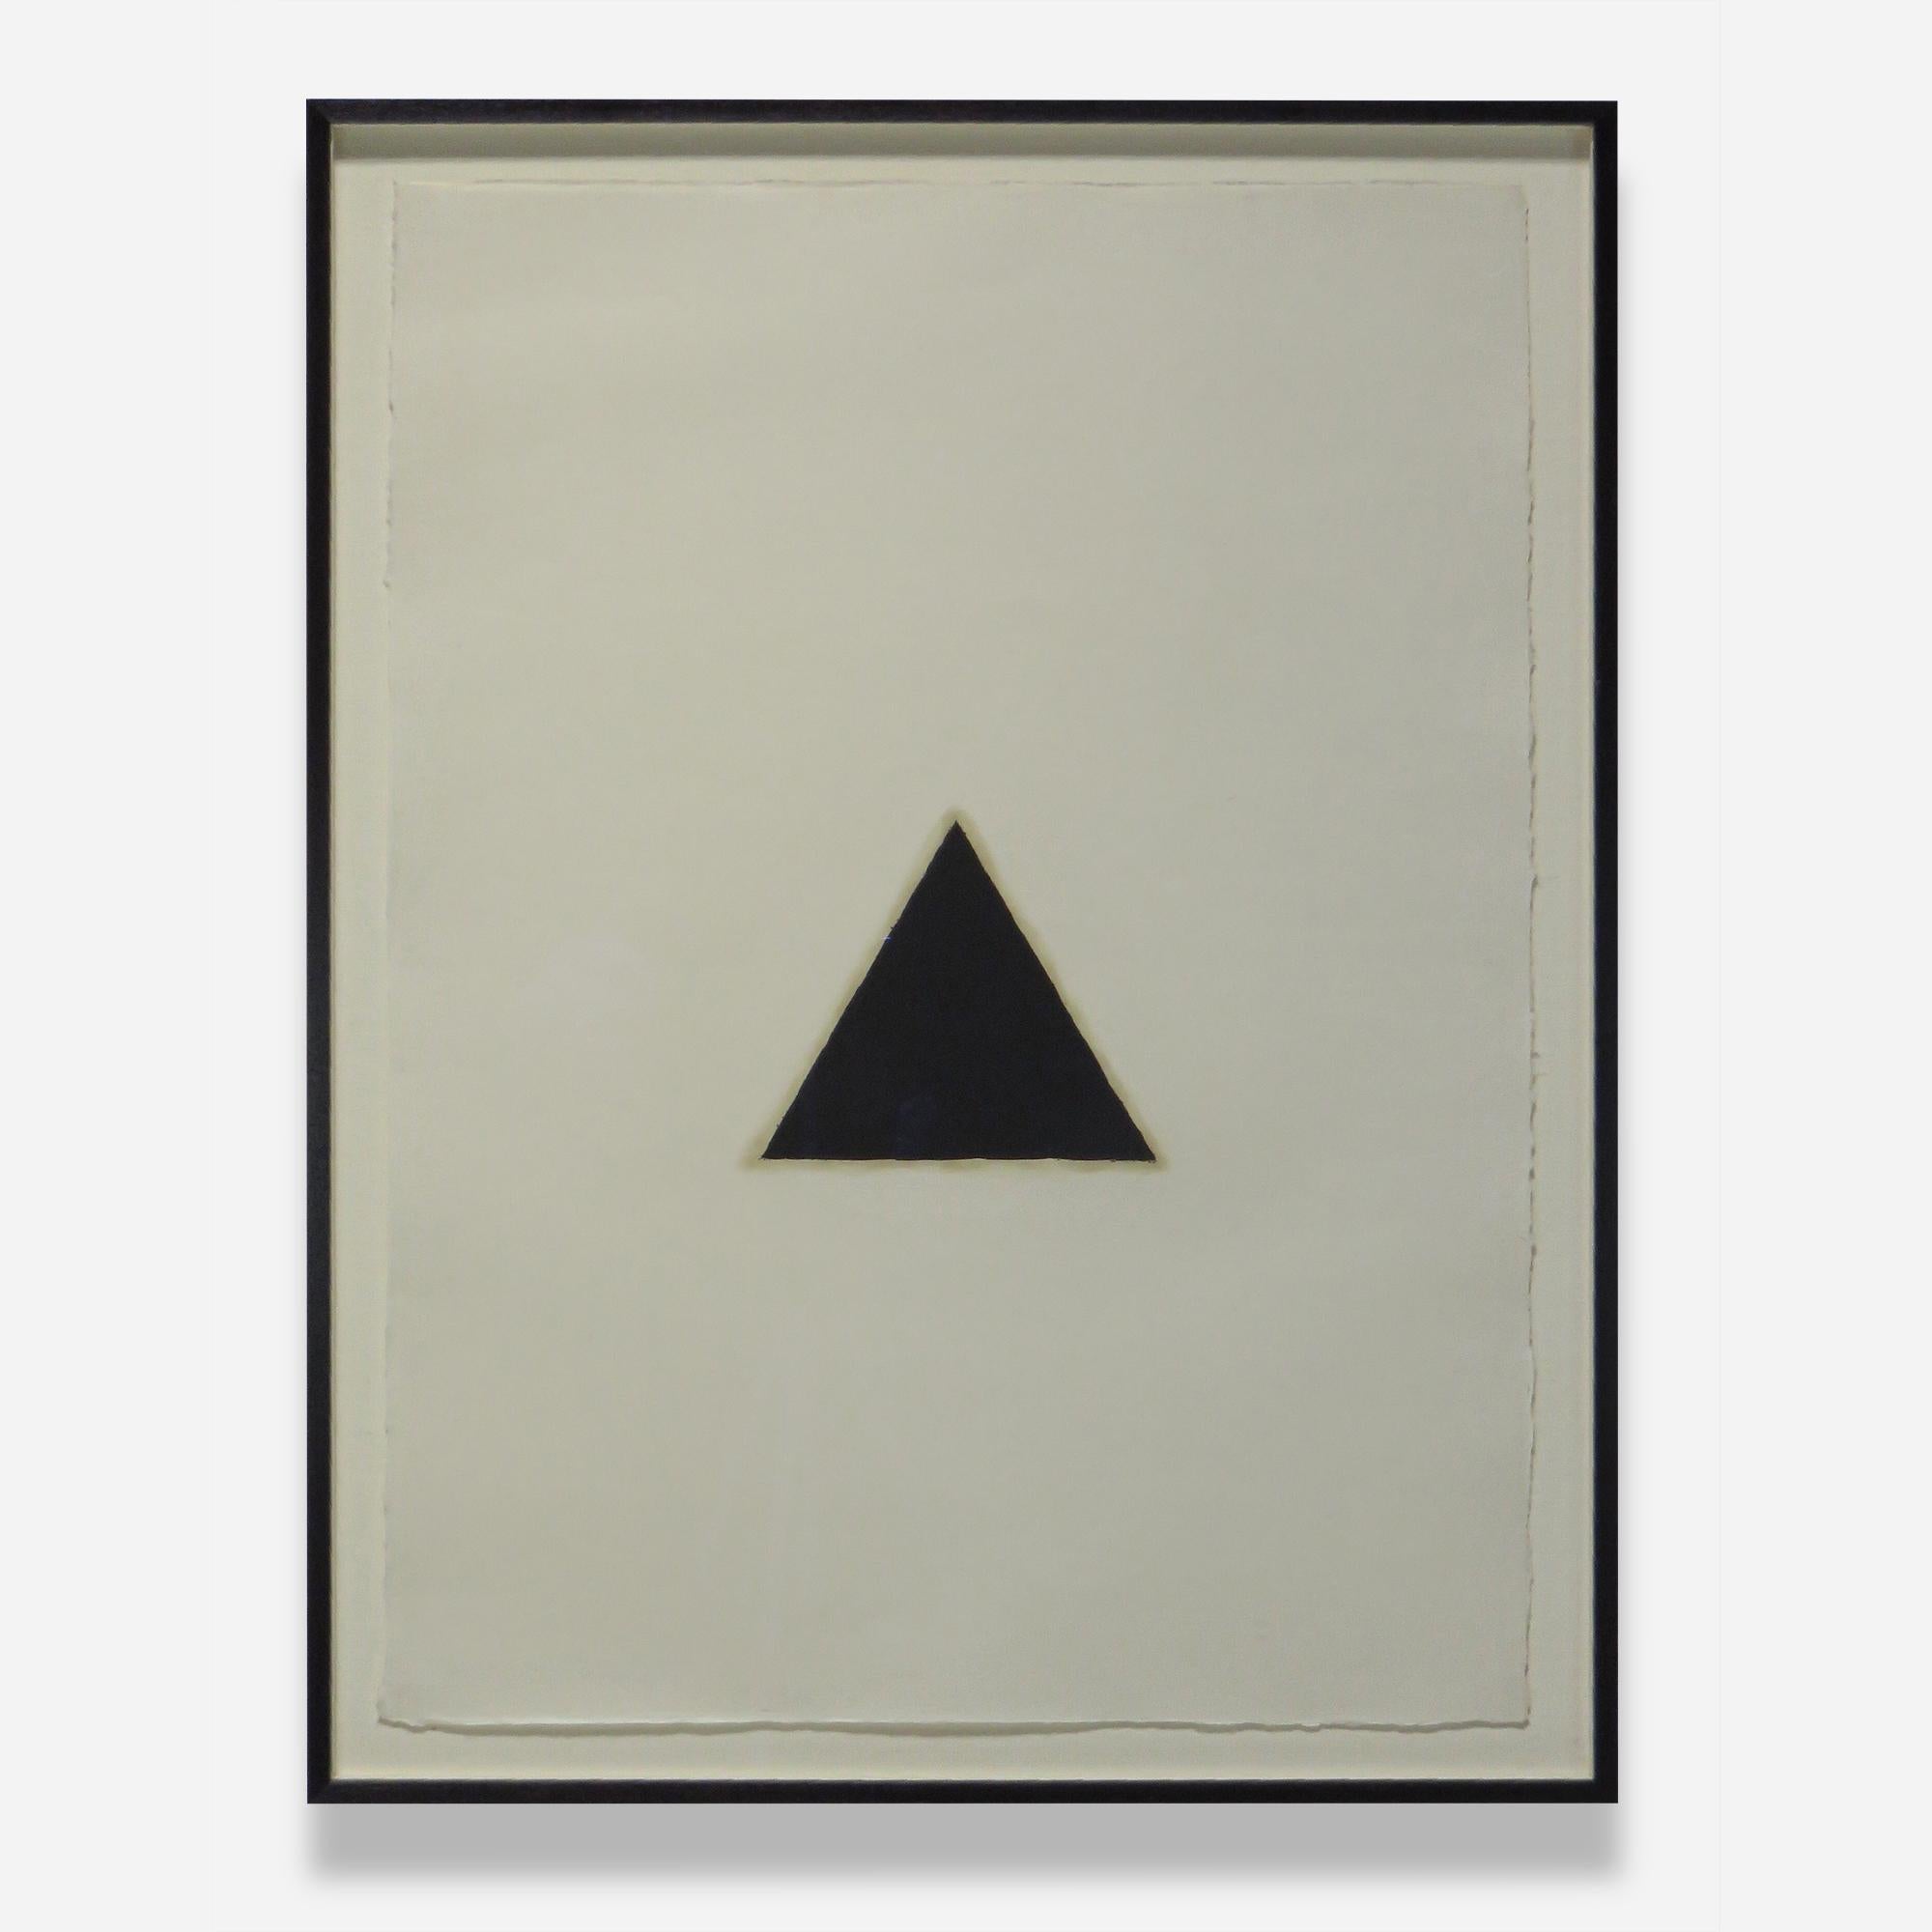 Tadaaki Kuwayama, Aquatints, 1990, on hand made Ichibei Iwano Japanese paper, each signed in pencil, 
Printed by Wingate Studio, New Hampshire.

Framed: Height: 35